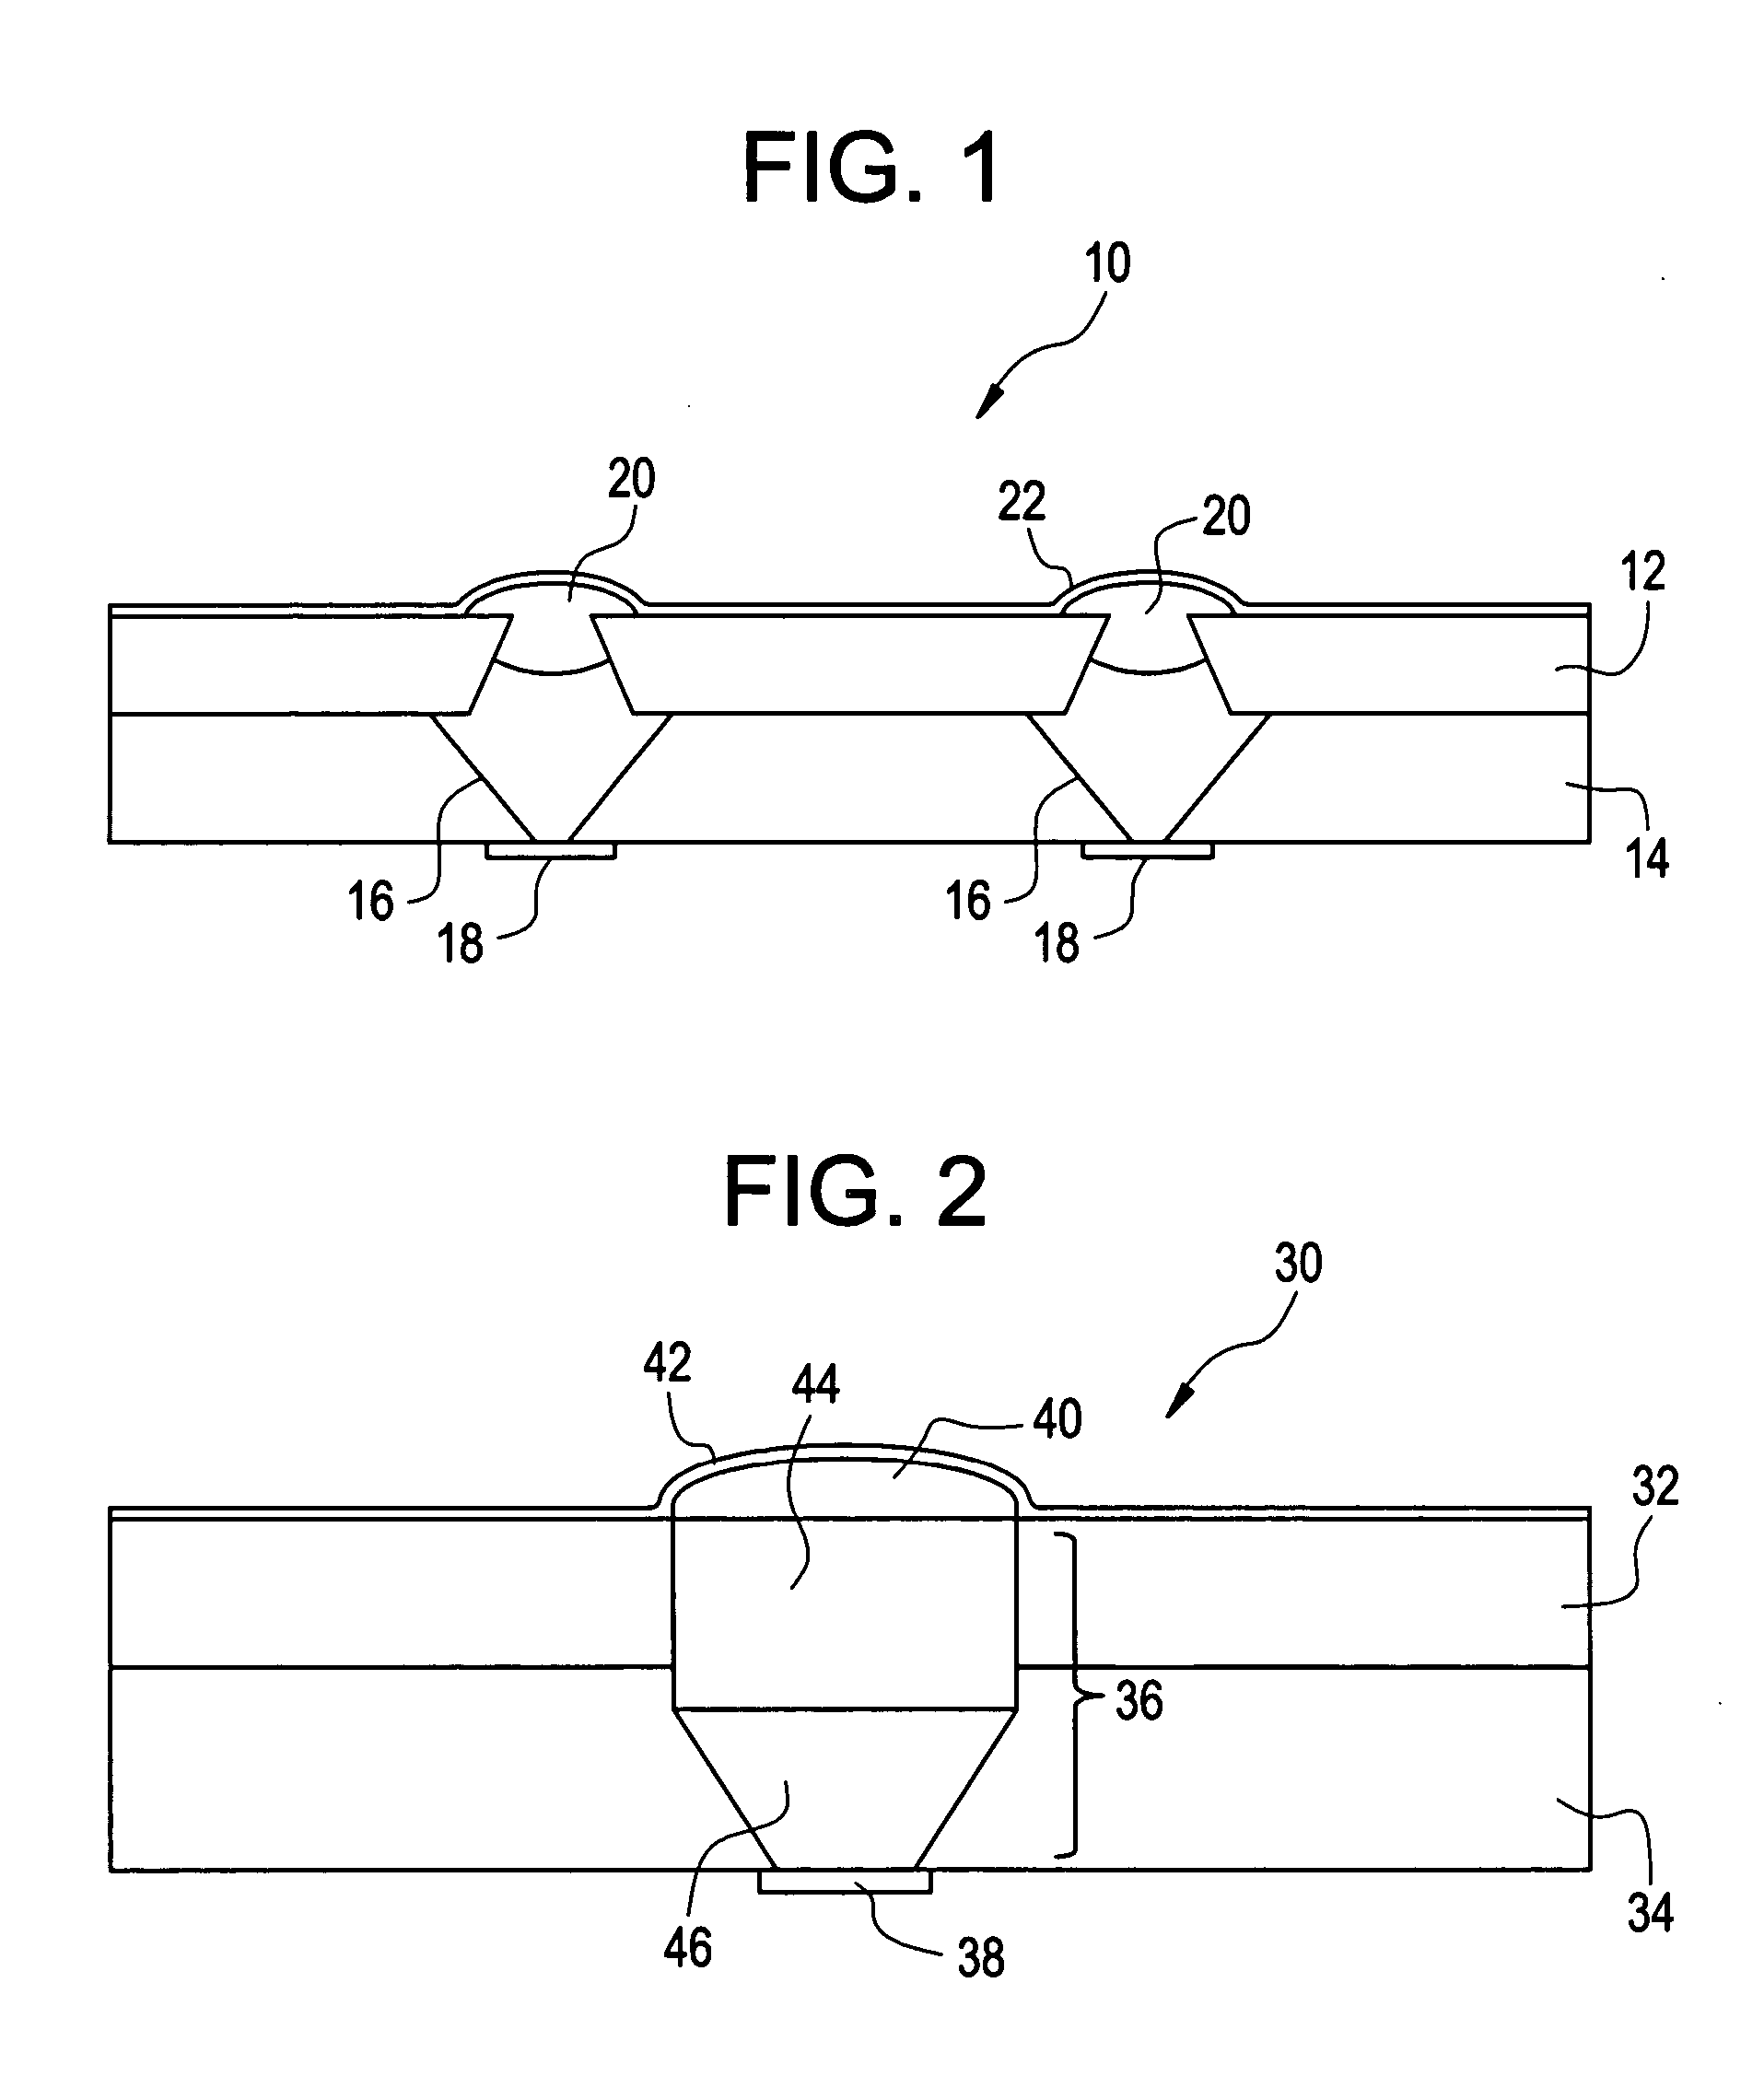 Low temperature methods for hermetically sealing reservoir devices